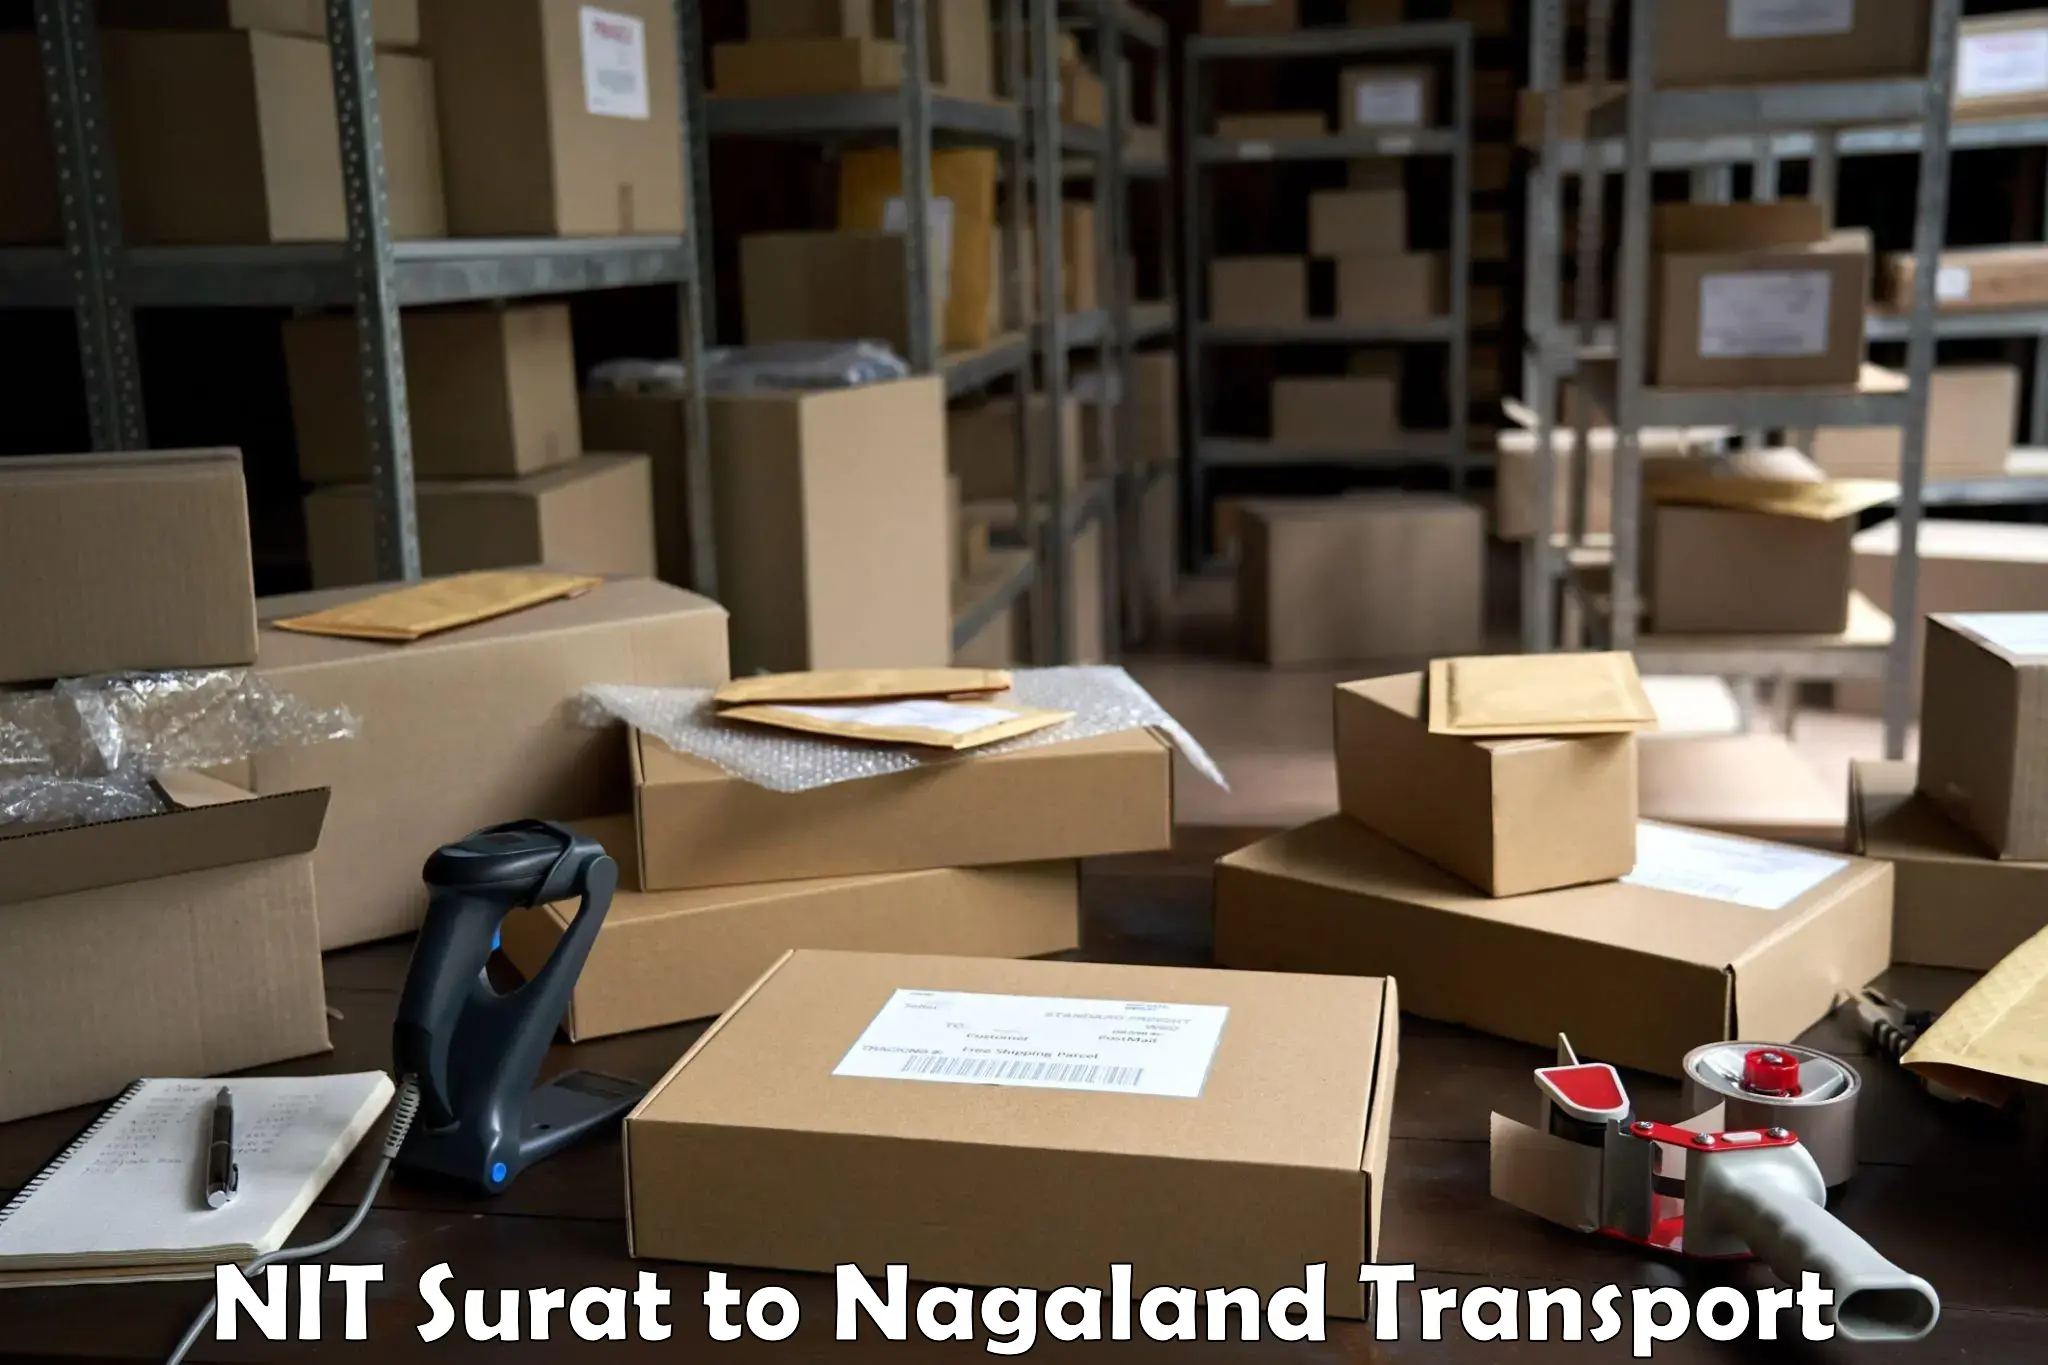 Nearby transport service NIT Surat to Nagaland